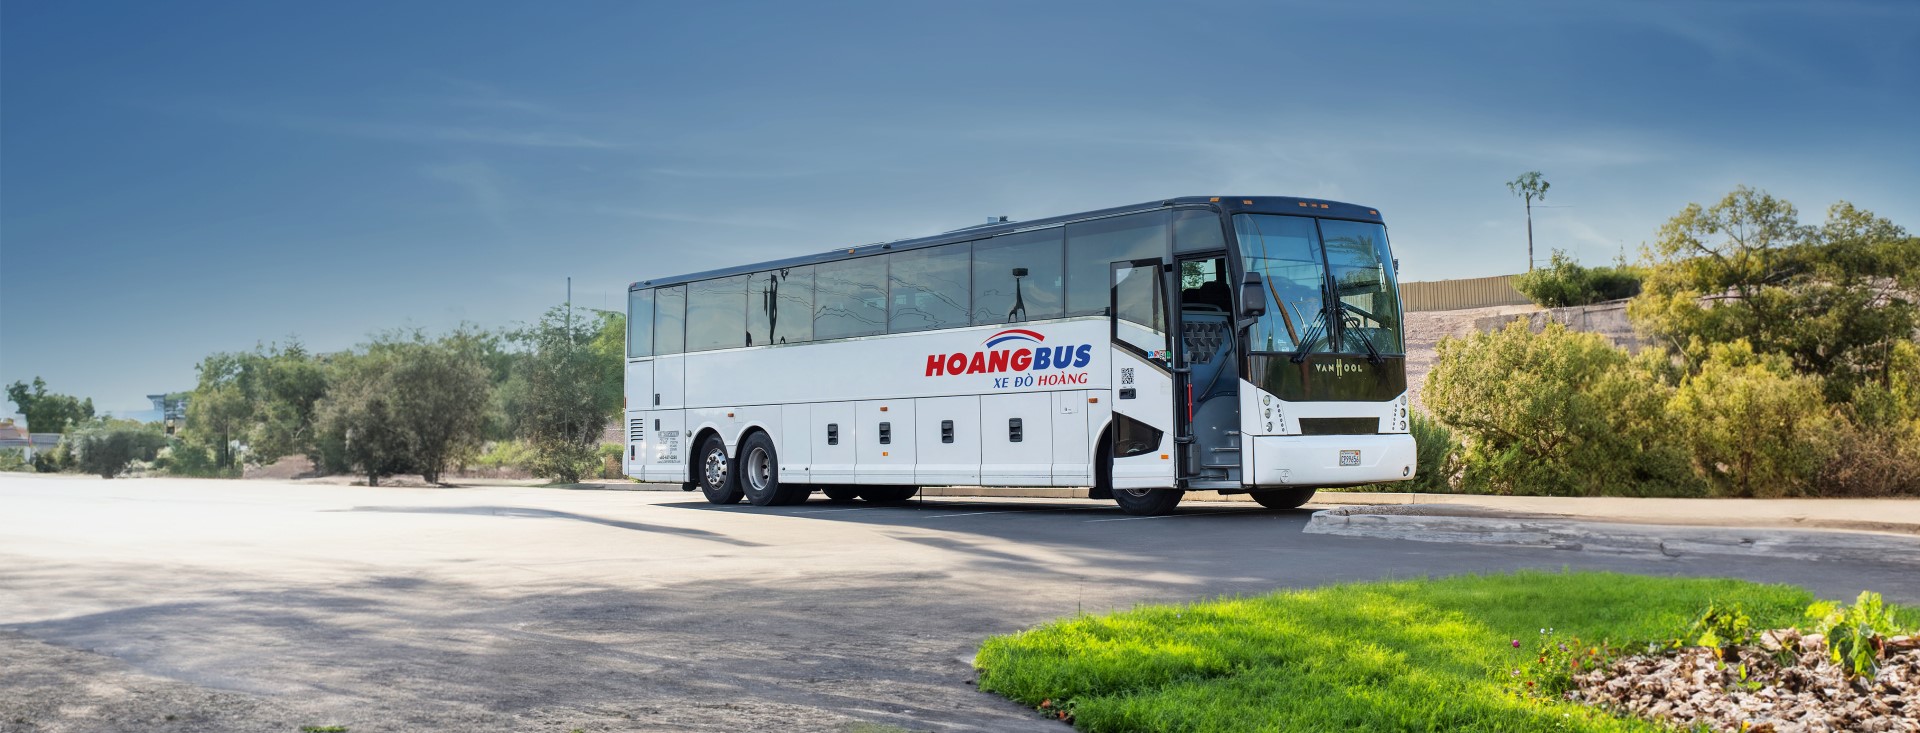 Home - Hoang Bus - Tickets Booking Online